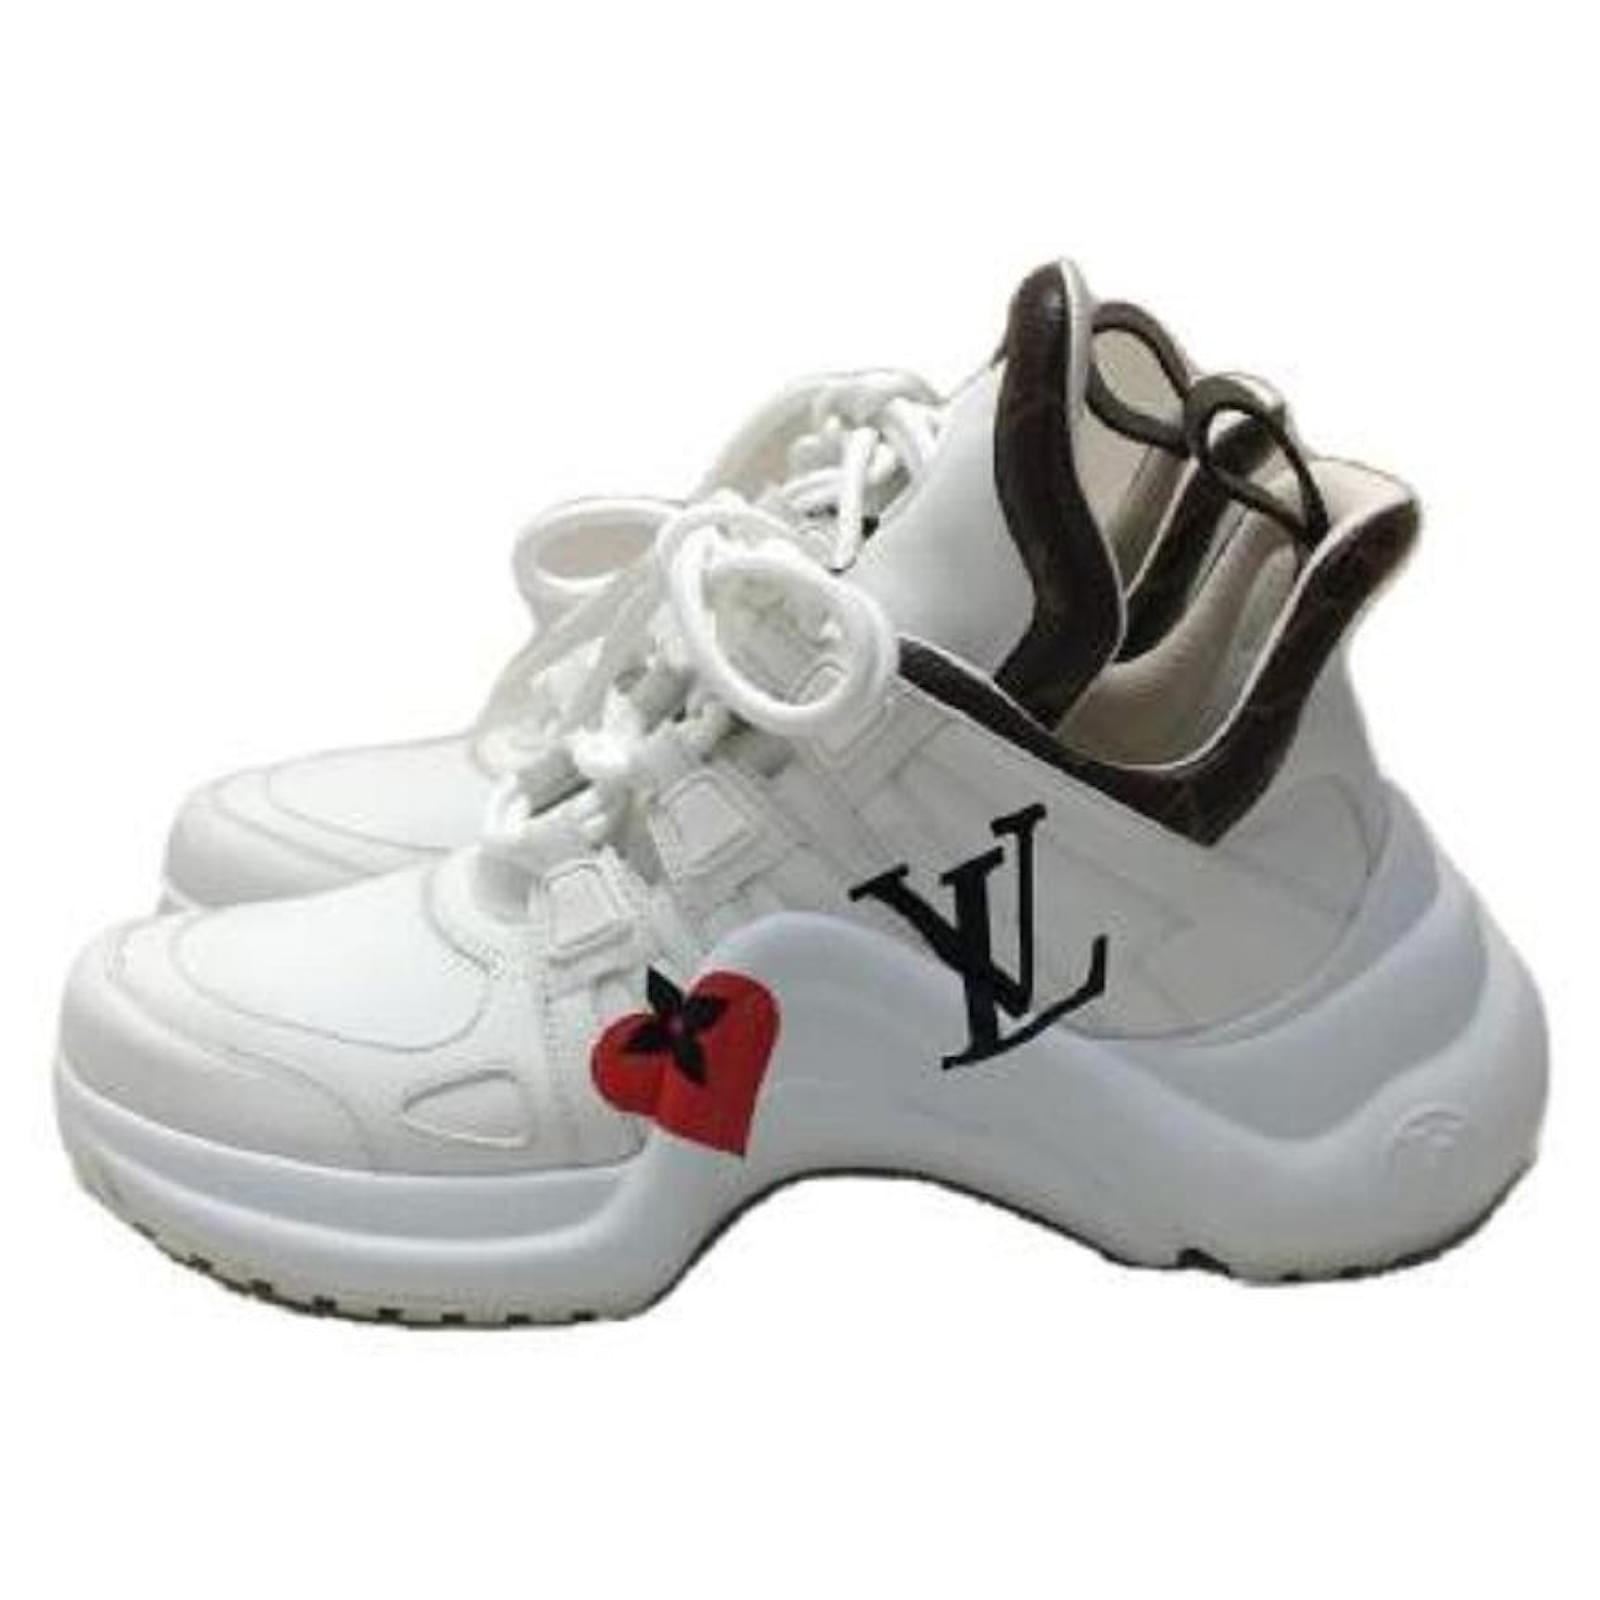 Used] LOUIS VUITTON High Cut Sneakers / Game On LV Arclight Line